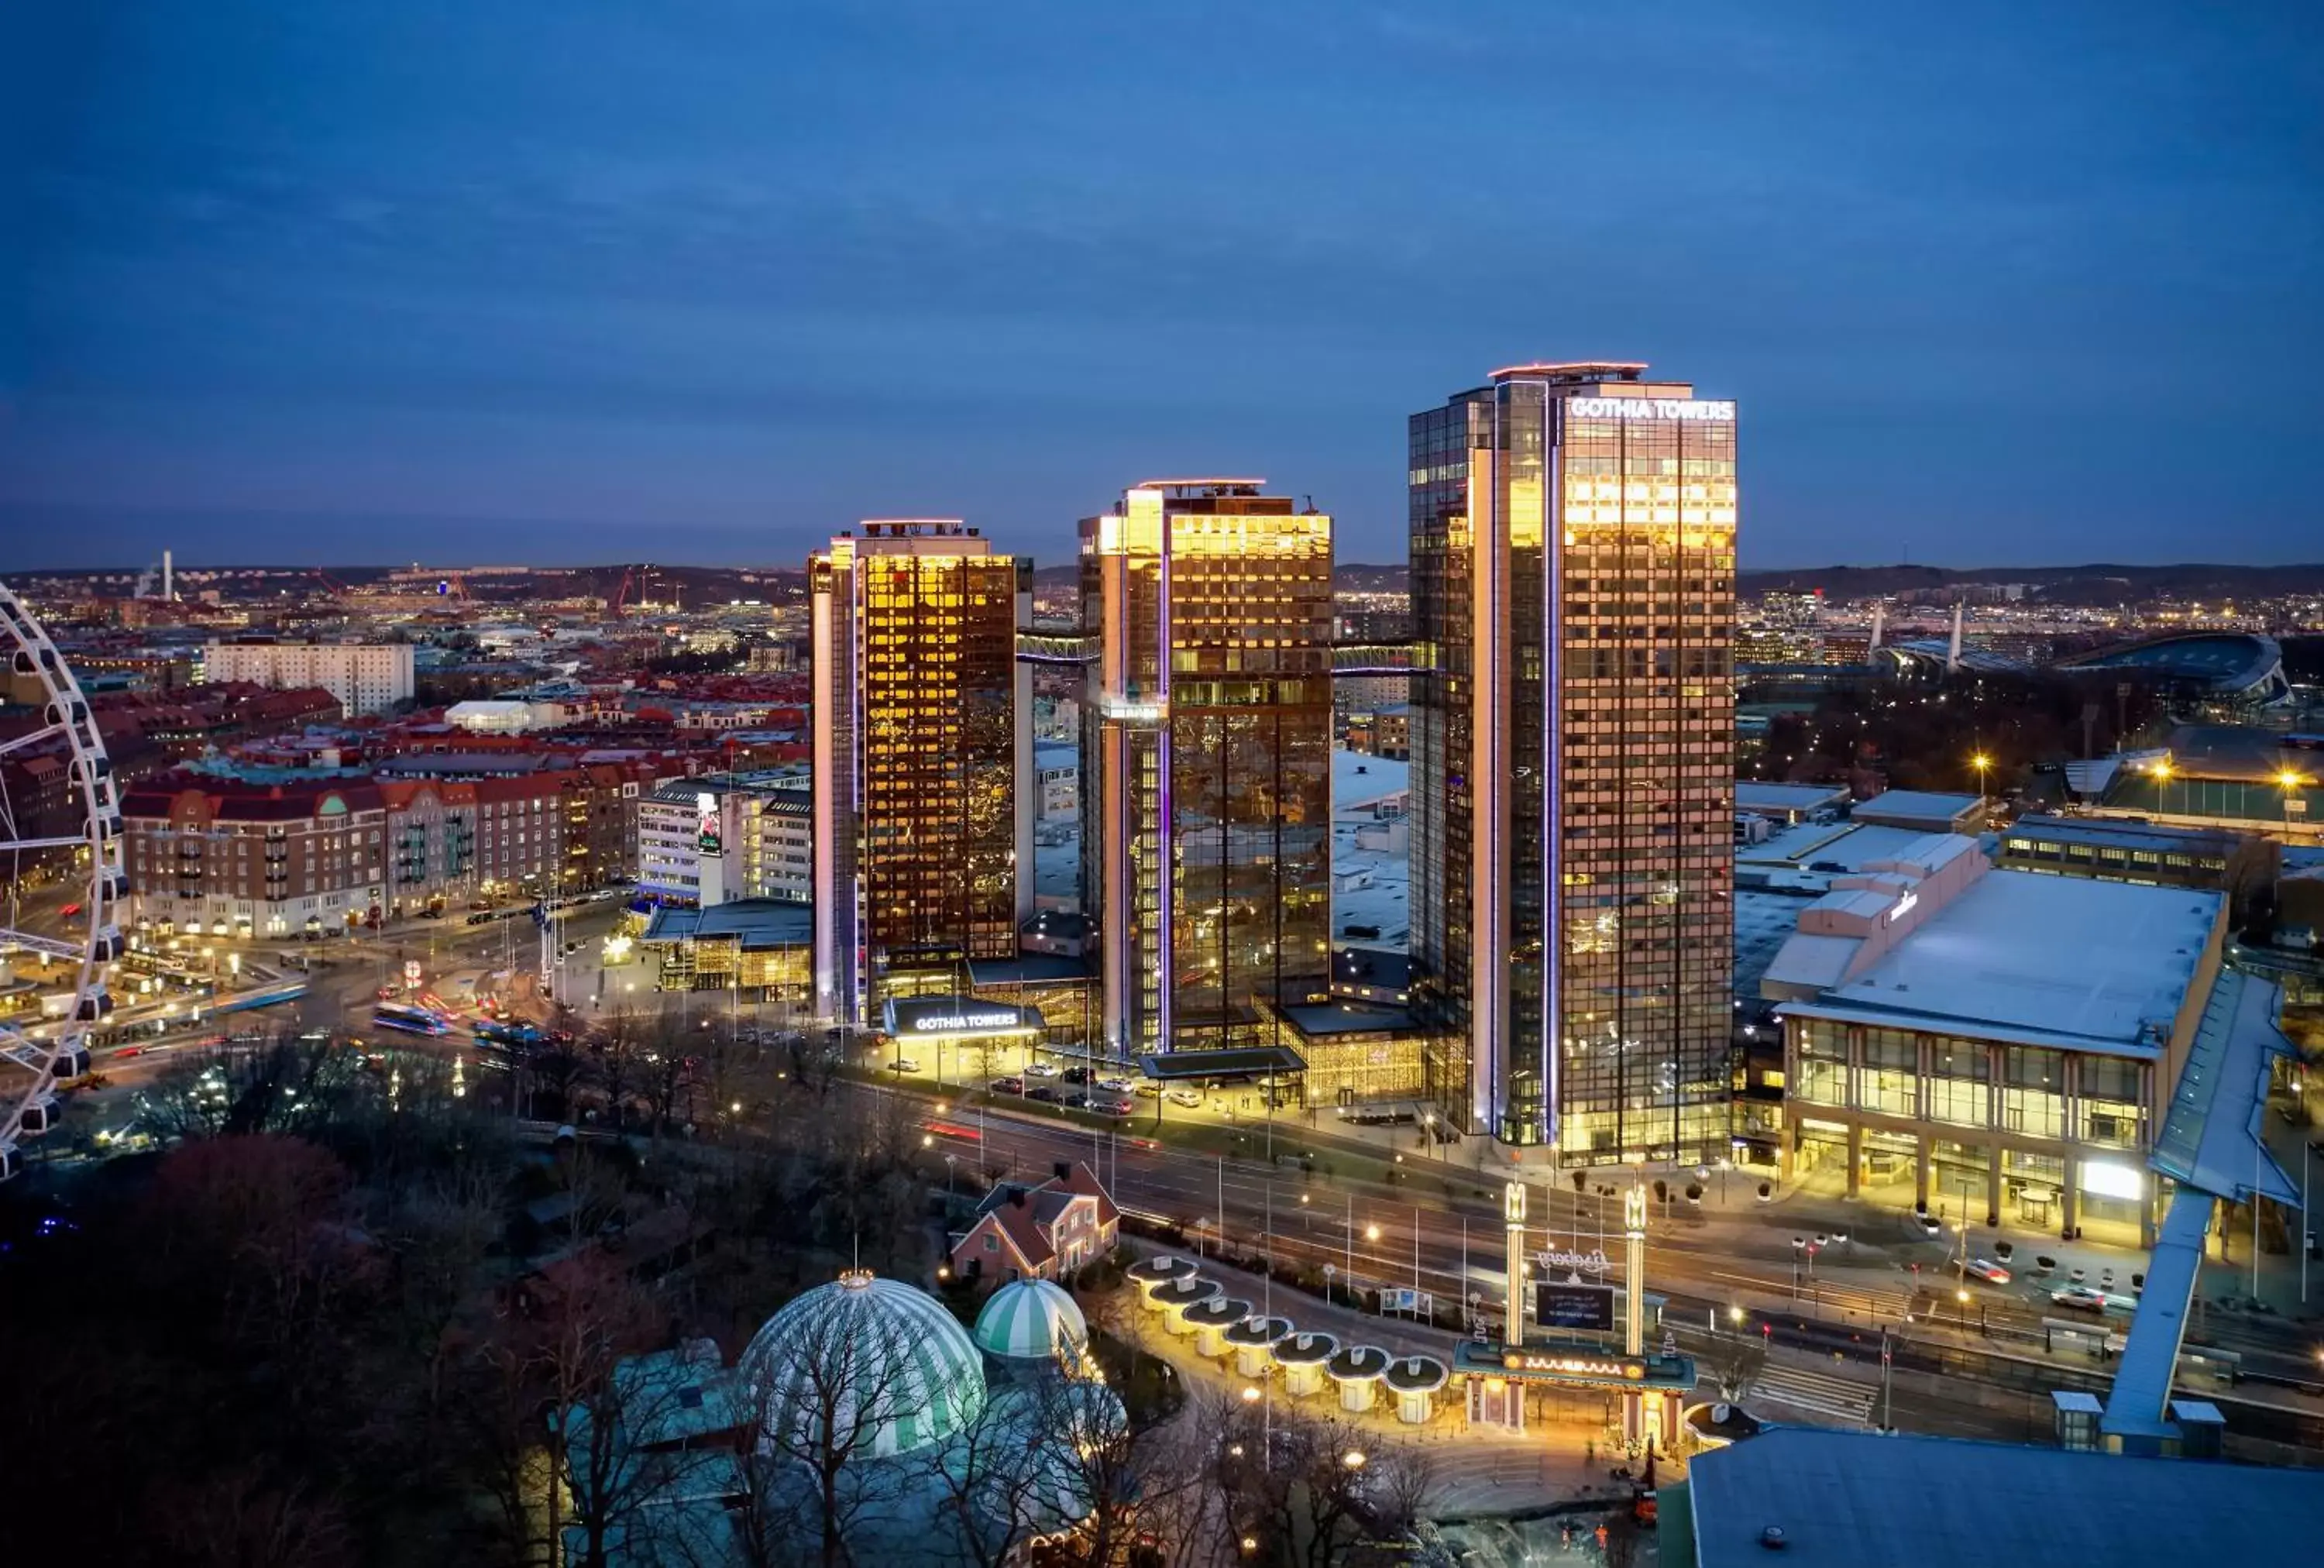 Off site, Bird's-eye View in Gothia Towers